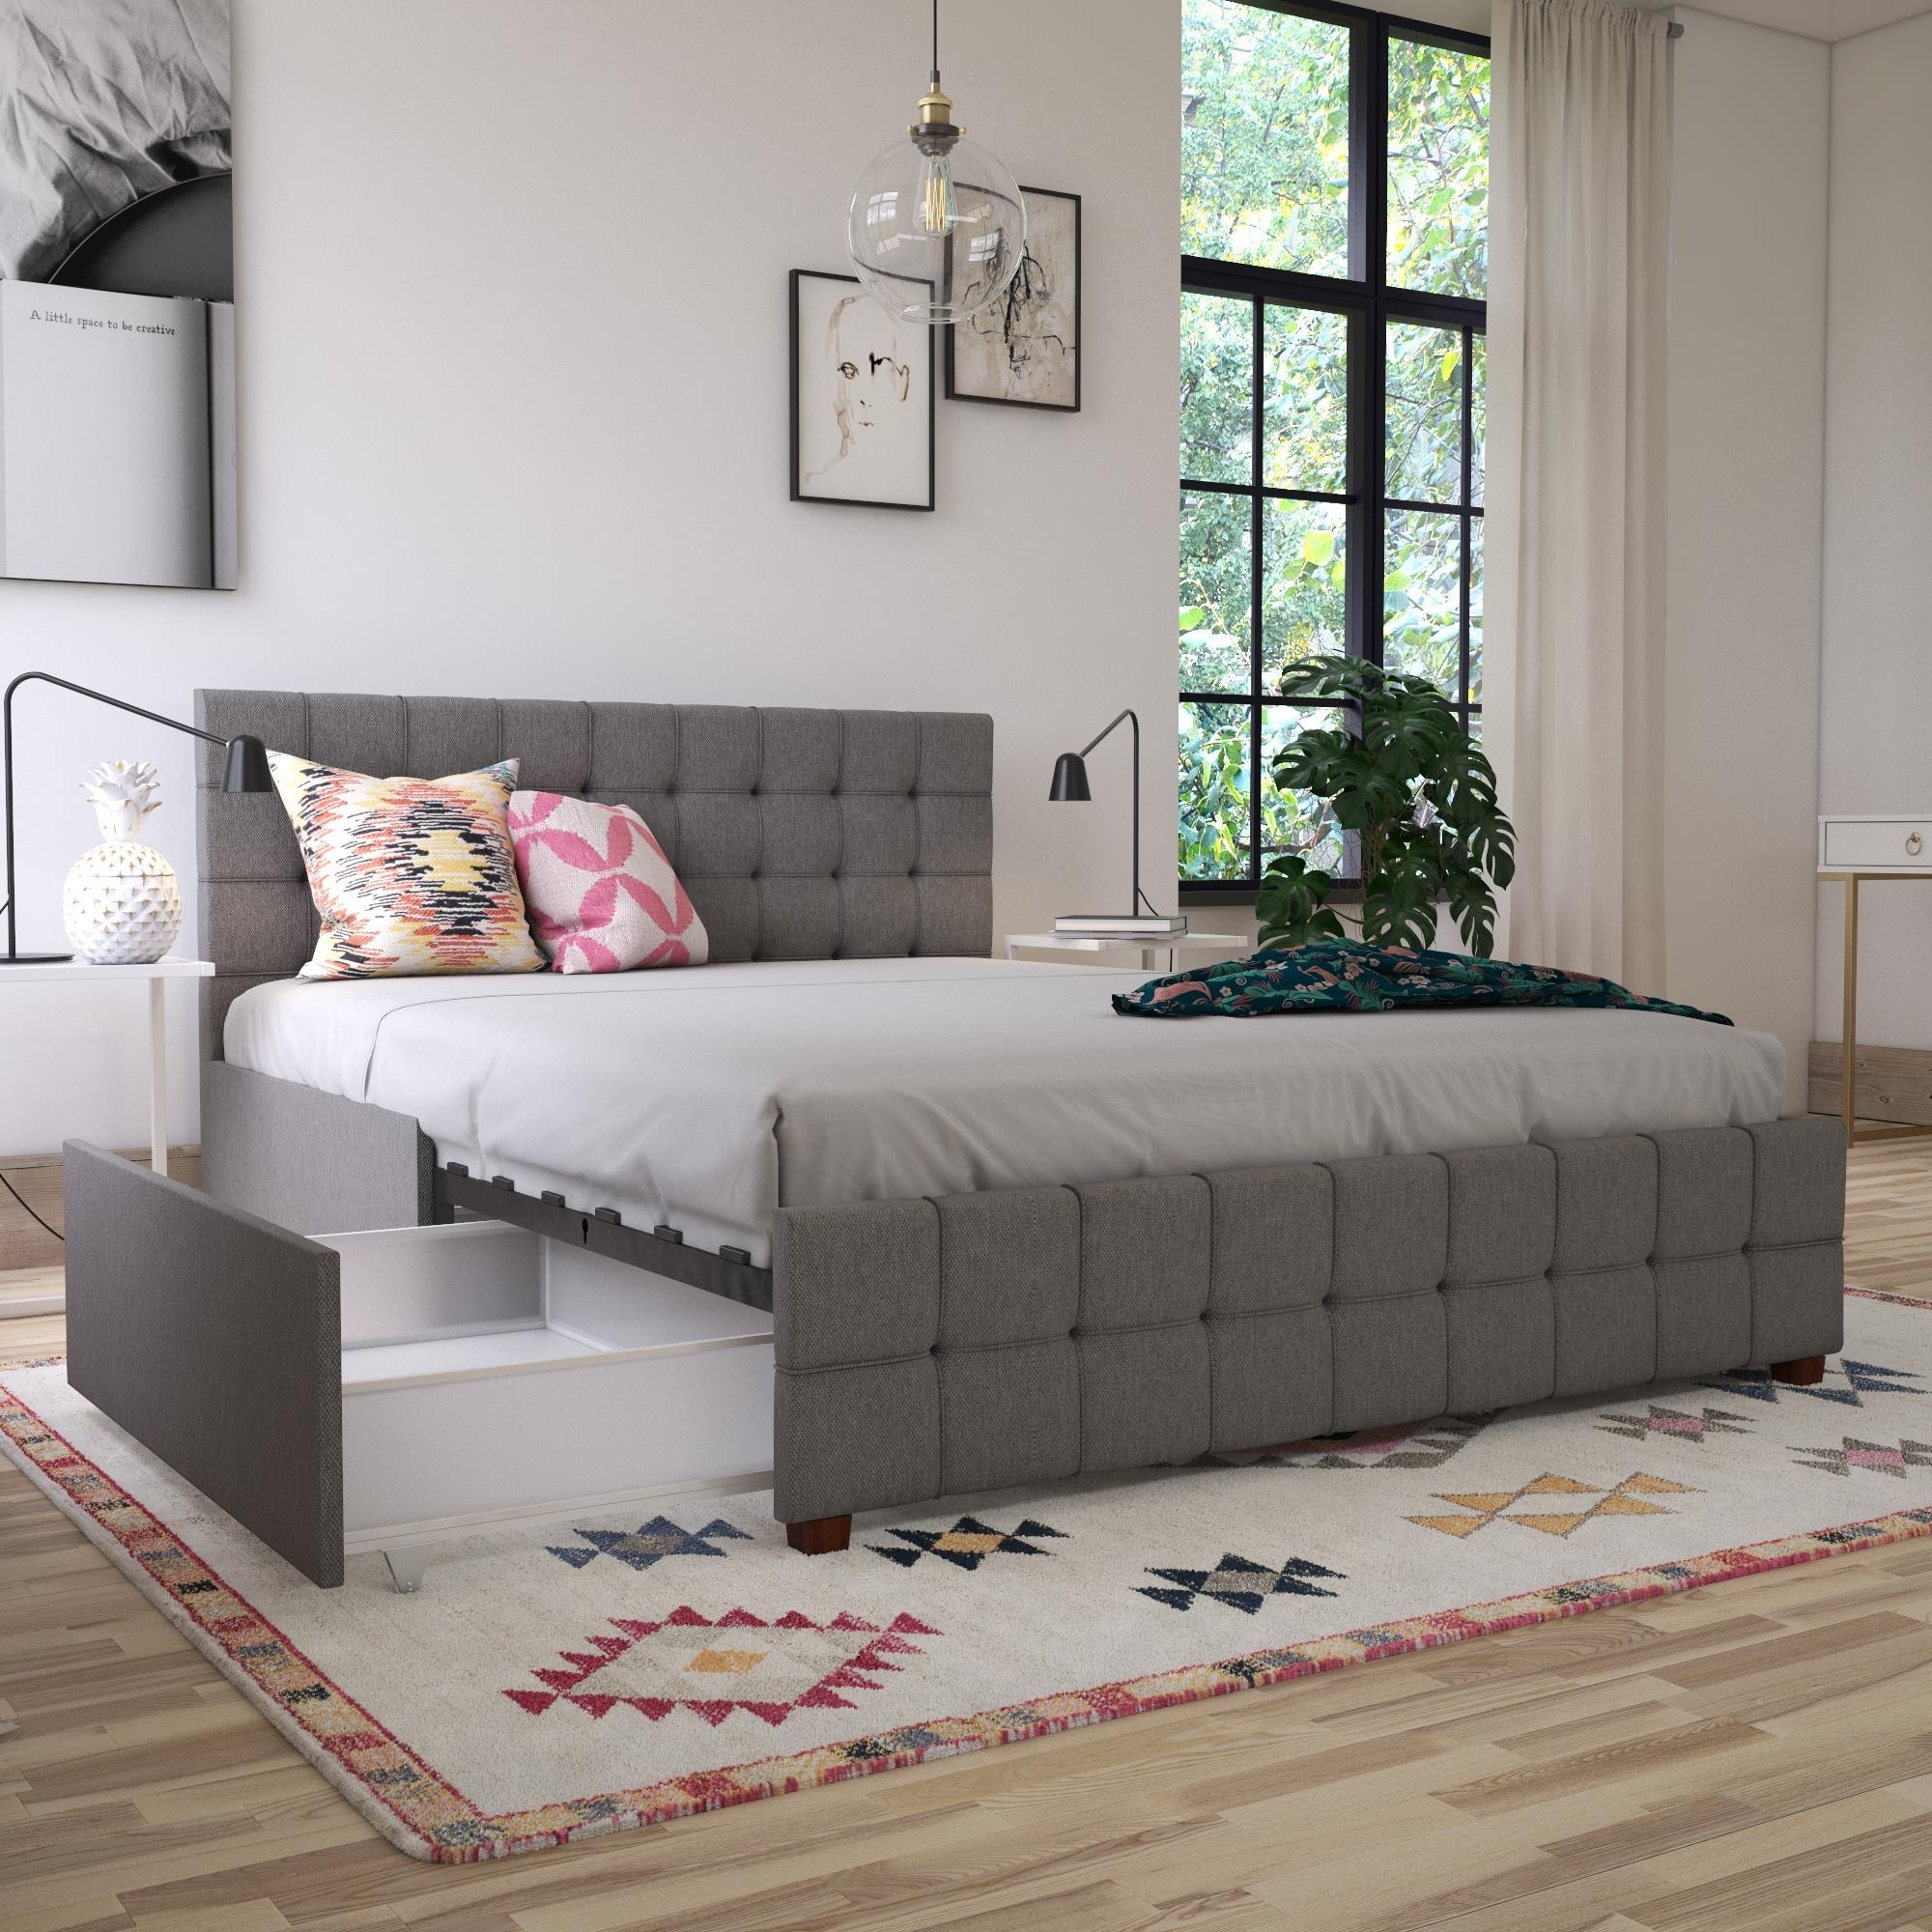 CosmoLiving by Cosmopolitan Beds and Headboards - Bed Bath & Beyond